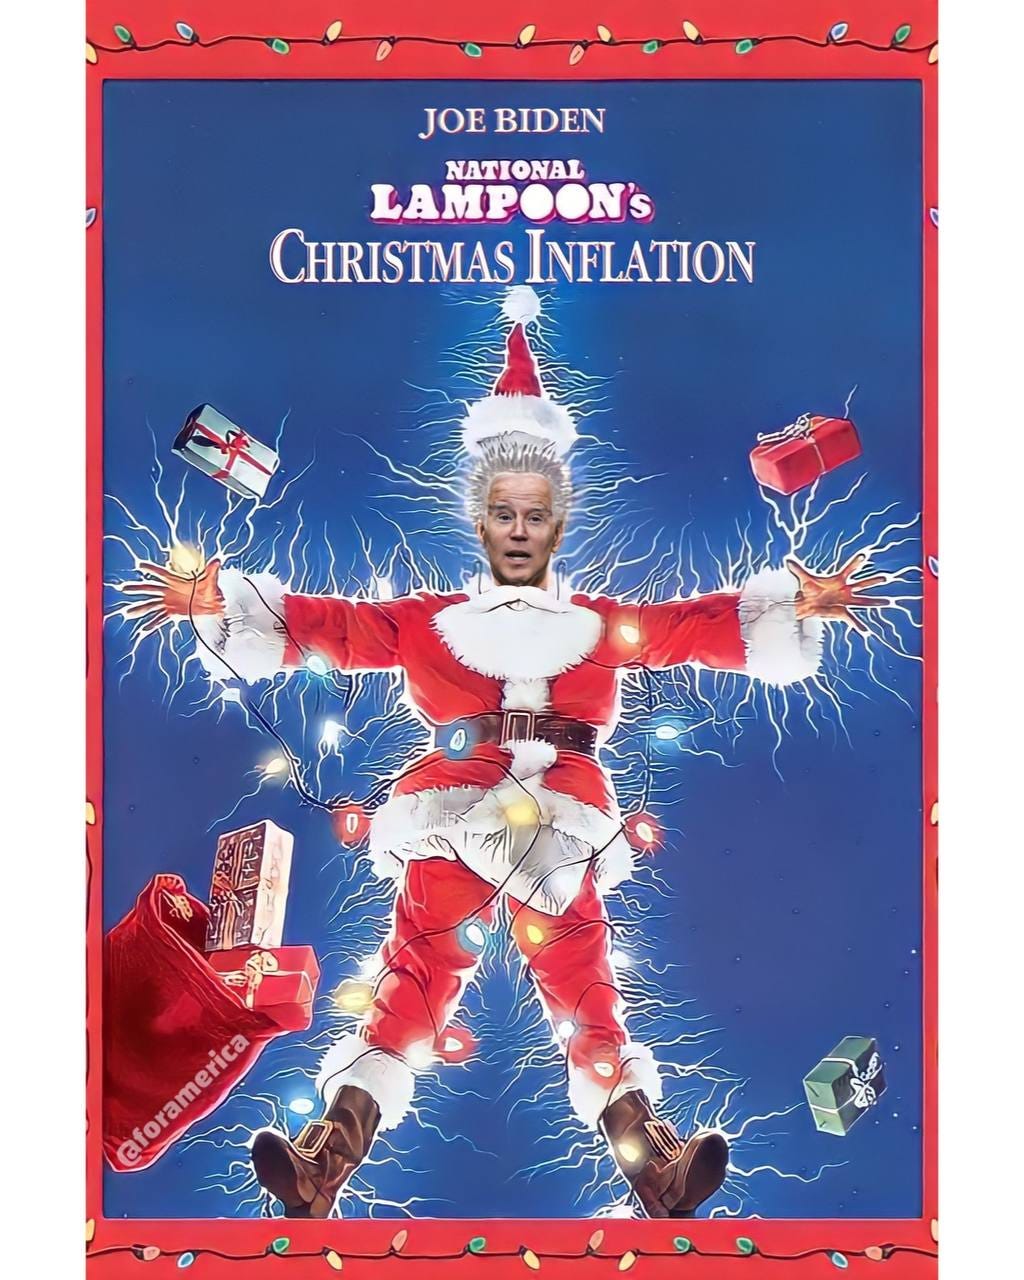 May be an image of text that says 'JOE BIDEN NATIONAL LAMPOON'S CHRISTMAS INFLATION dop @foramerica ramerica'